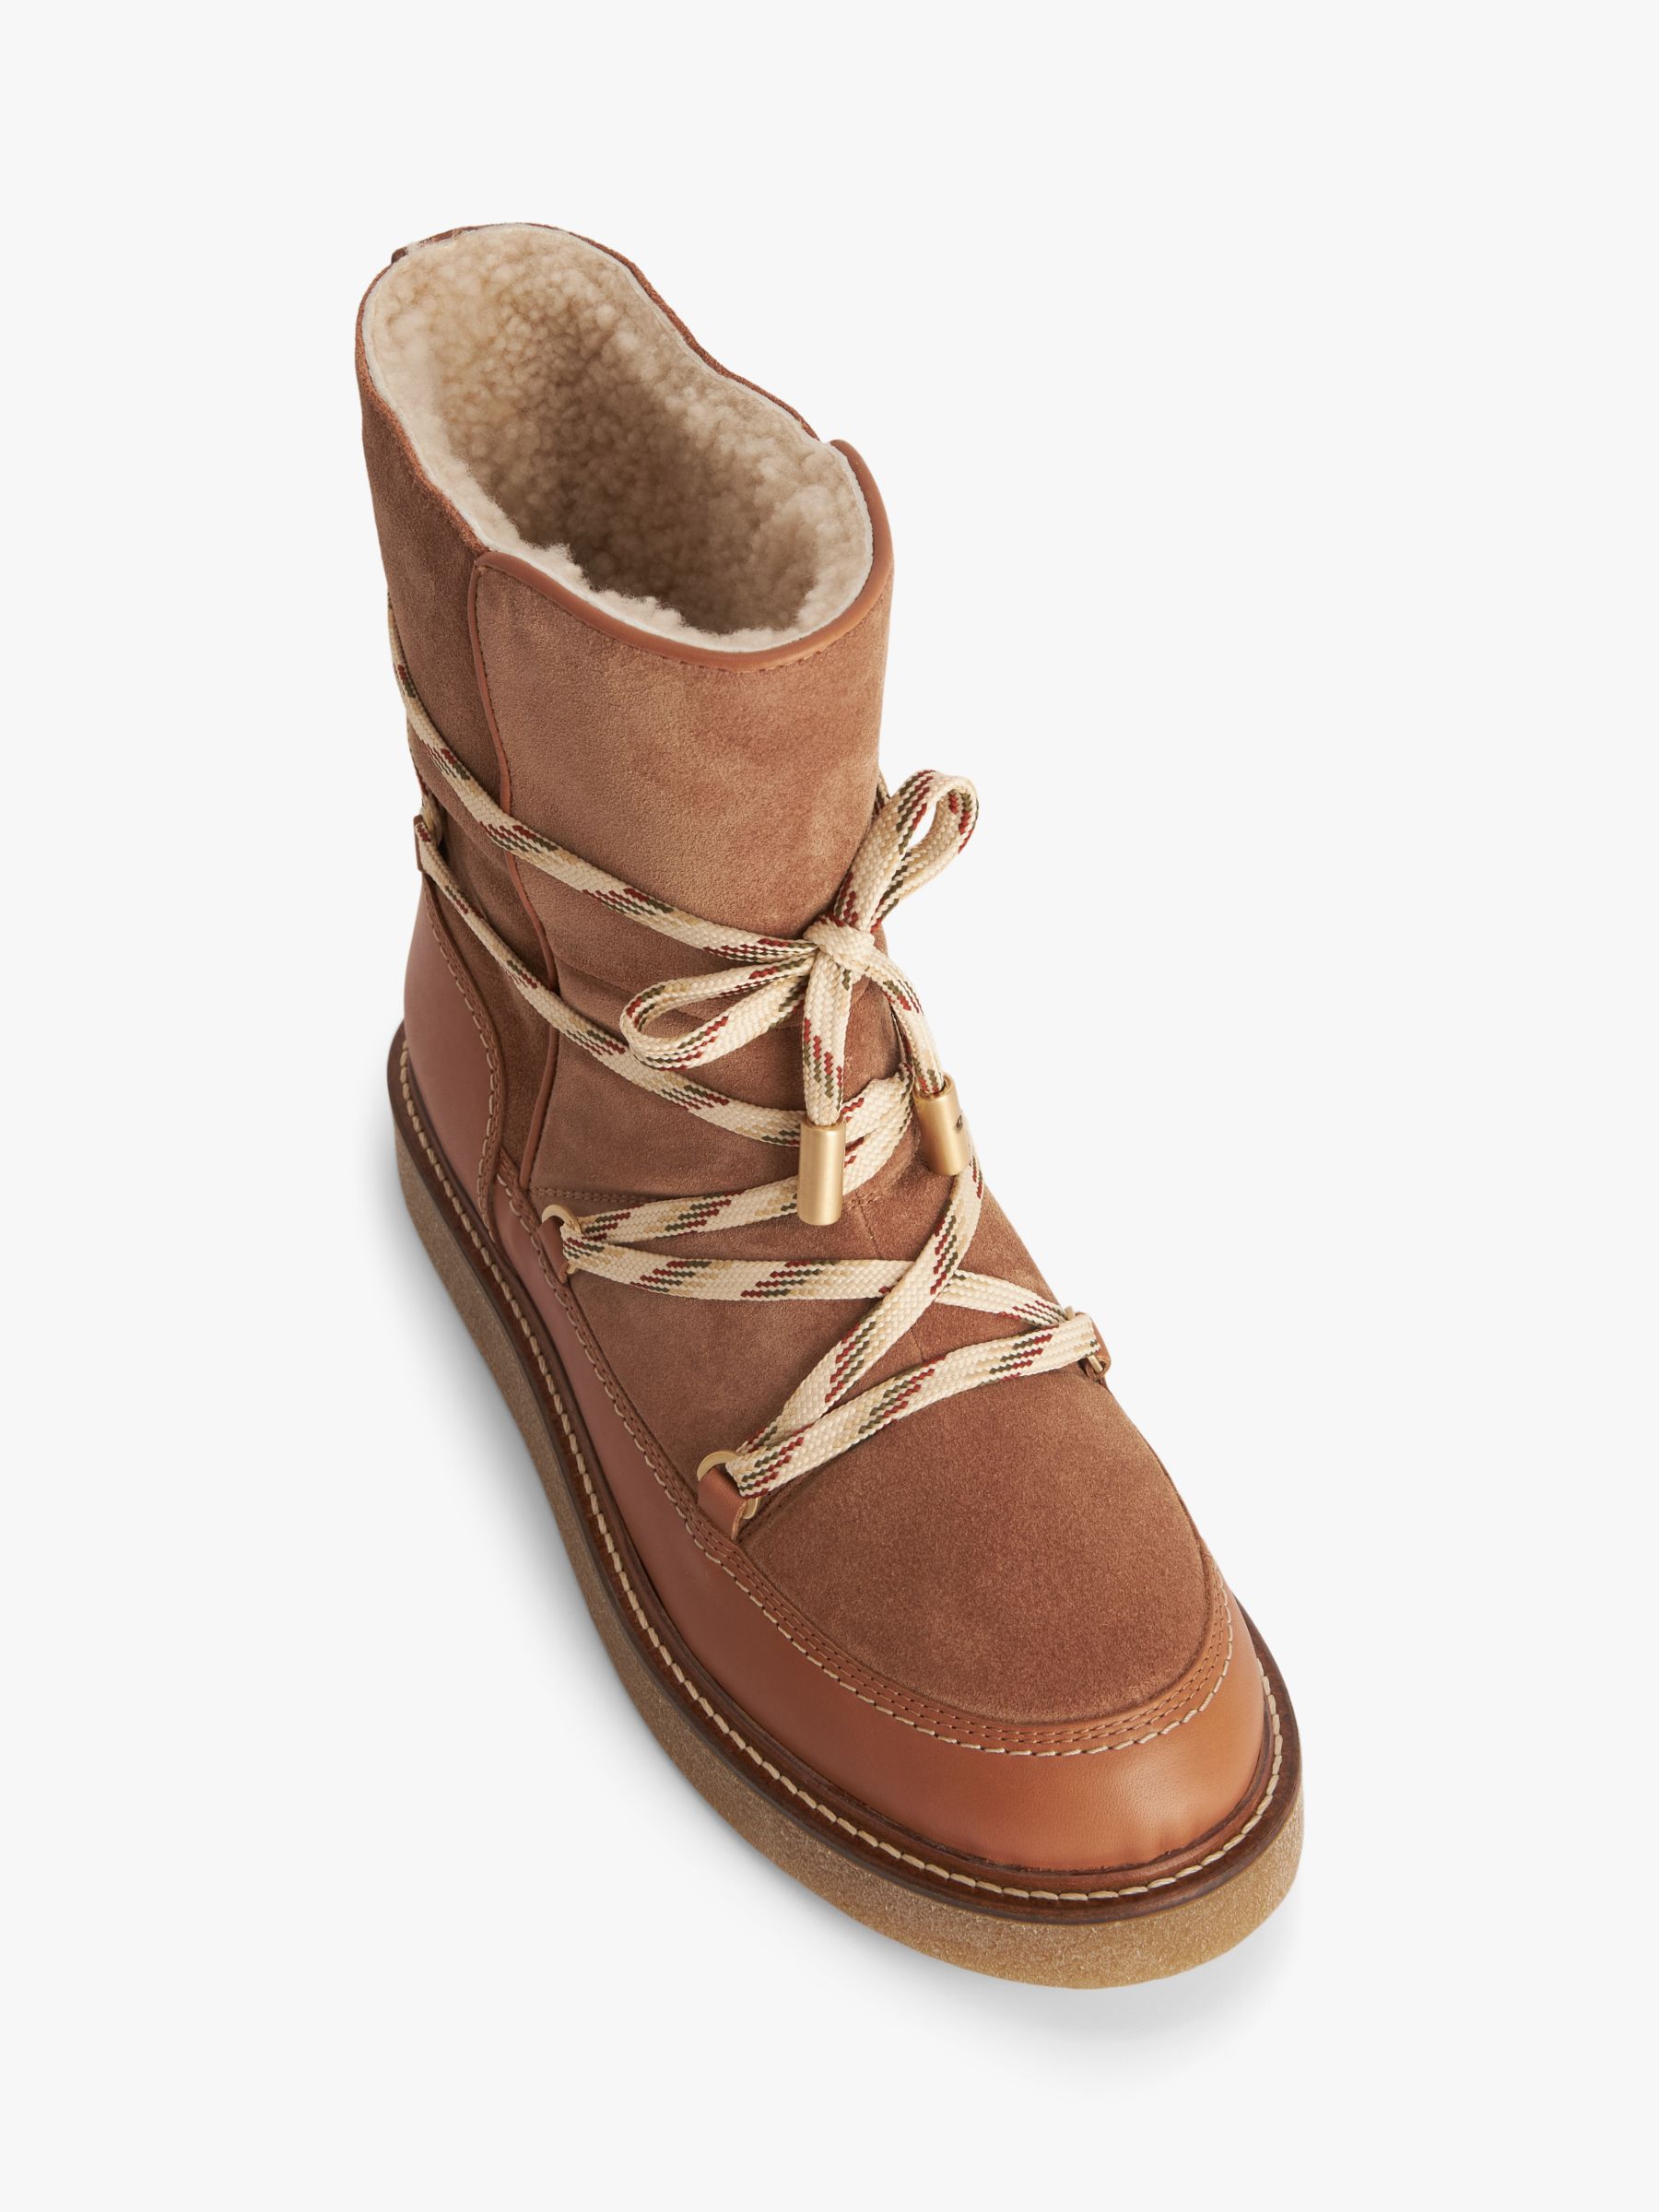 AND/OR Pilot Leather/Suede Lace Up Crepe Sole Snow Boots, Brown/Tan, 3